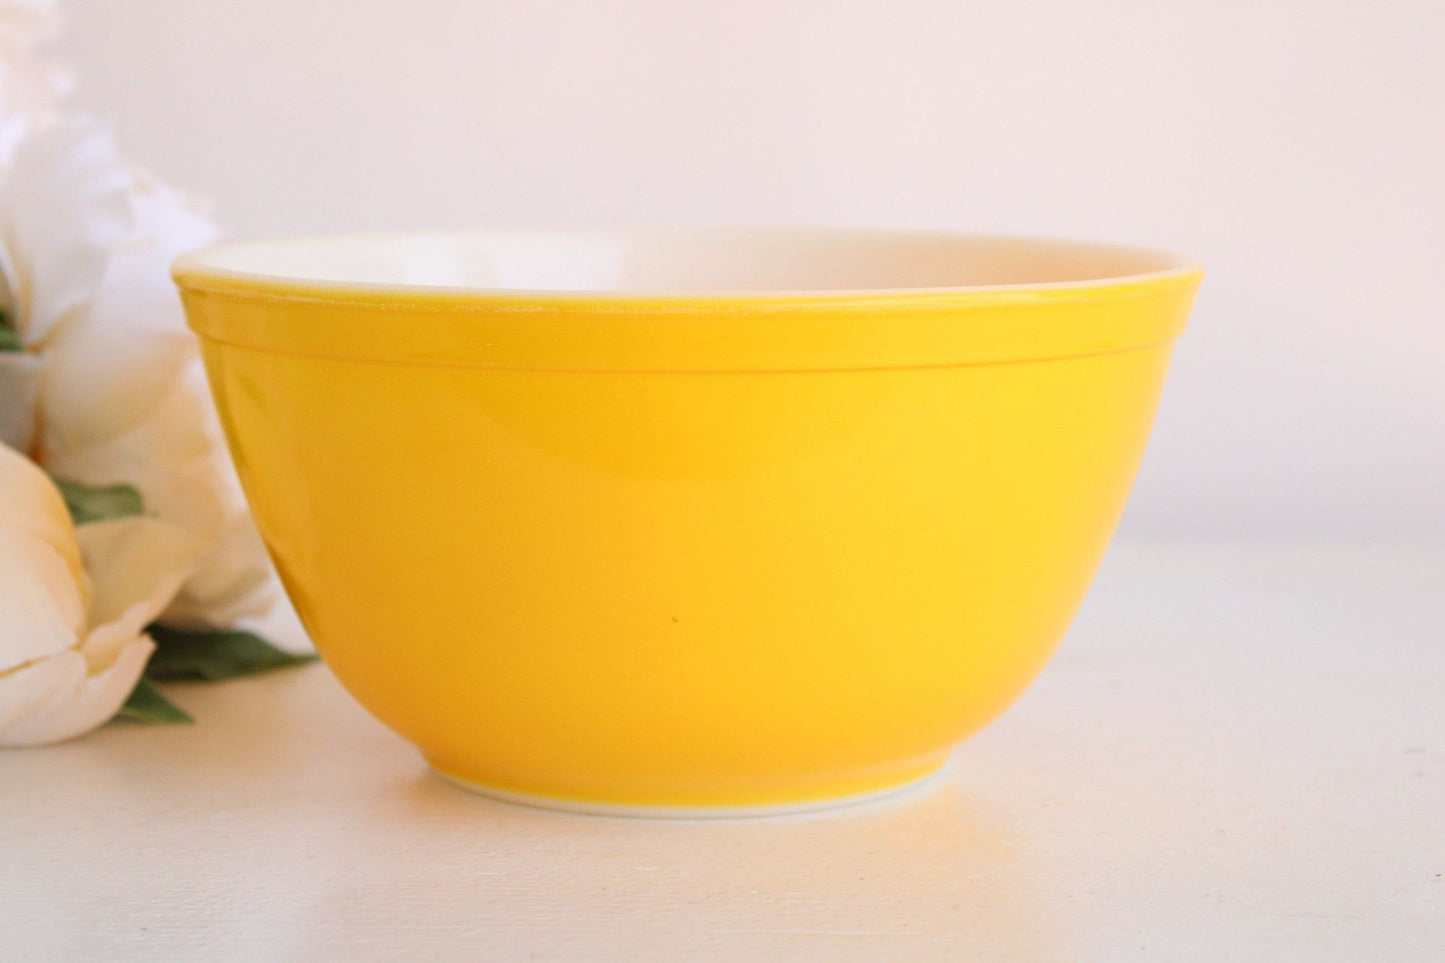 Pyrex Small Yellow Ovenware Mixing Bowl 1 1/2 Pint Bowl 401 Vintage 1950's  Made in USA Part of Primary Colors Mixing Bowl Set 